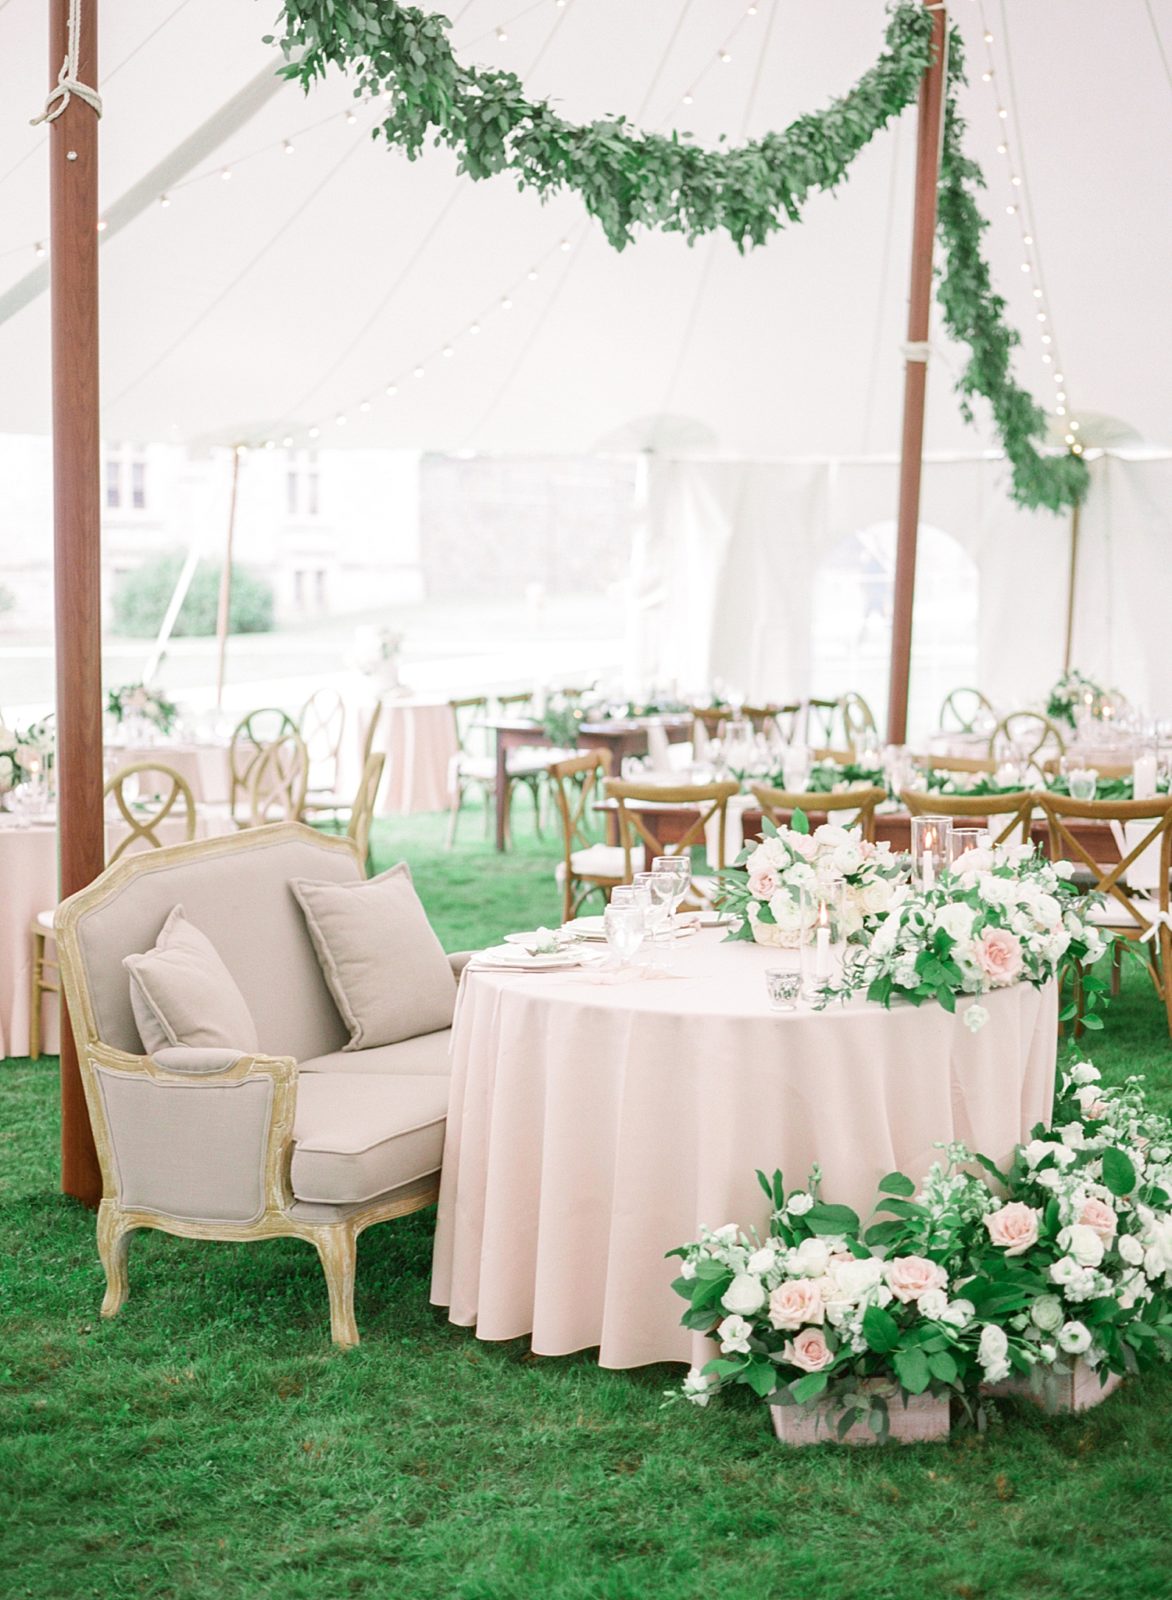 A Tented New York Wedding with Meredith & Chris | Jessa's Journal